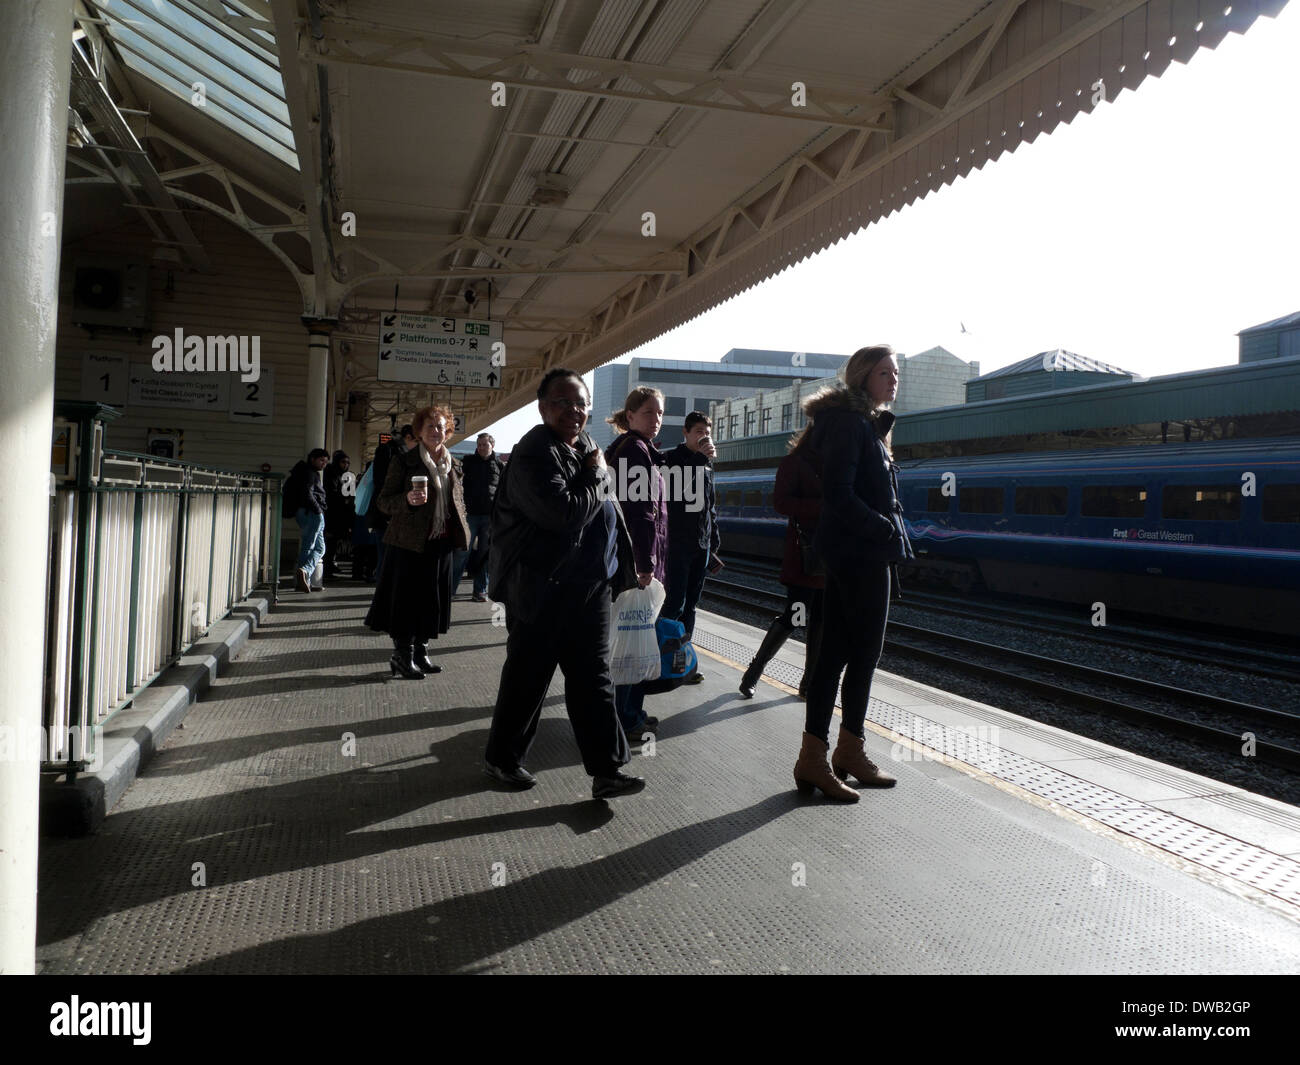 Rail passengers waiting for train on the platform at Cardiff Central Railway Station (Cardiff Train Station) in Wales UK  KATHY DEWITT Stock Photo